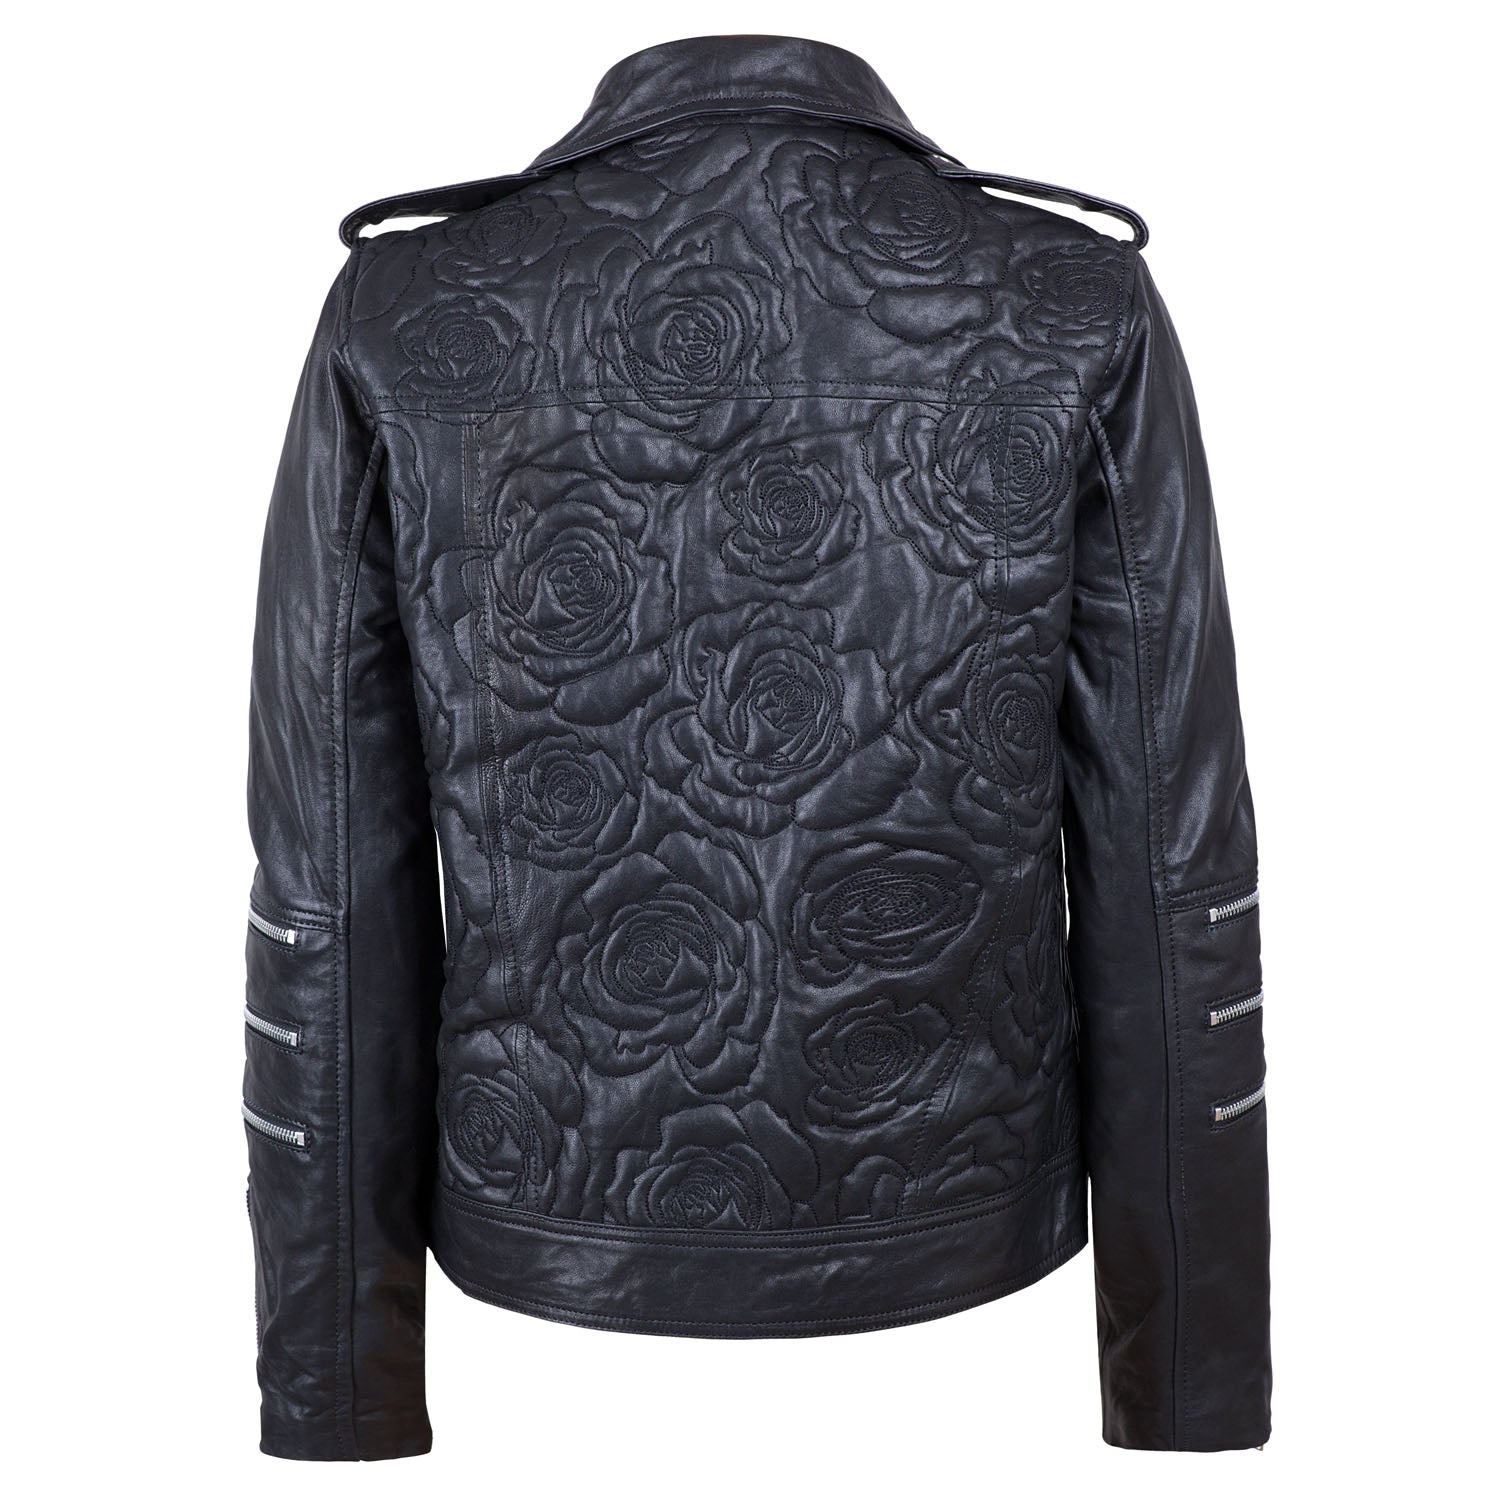 Roses In Silver Vases Embroidered Leather Jacket Back